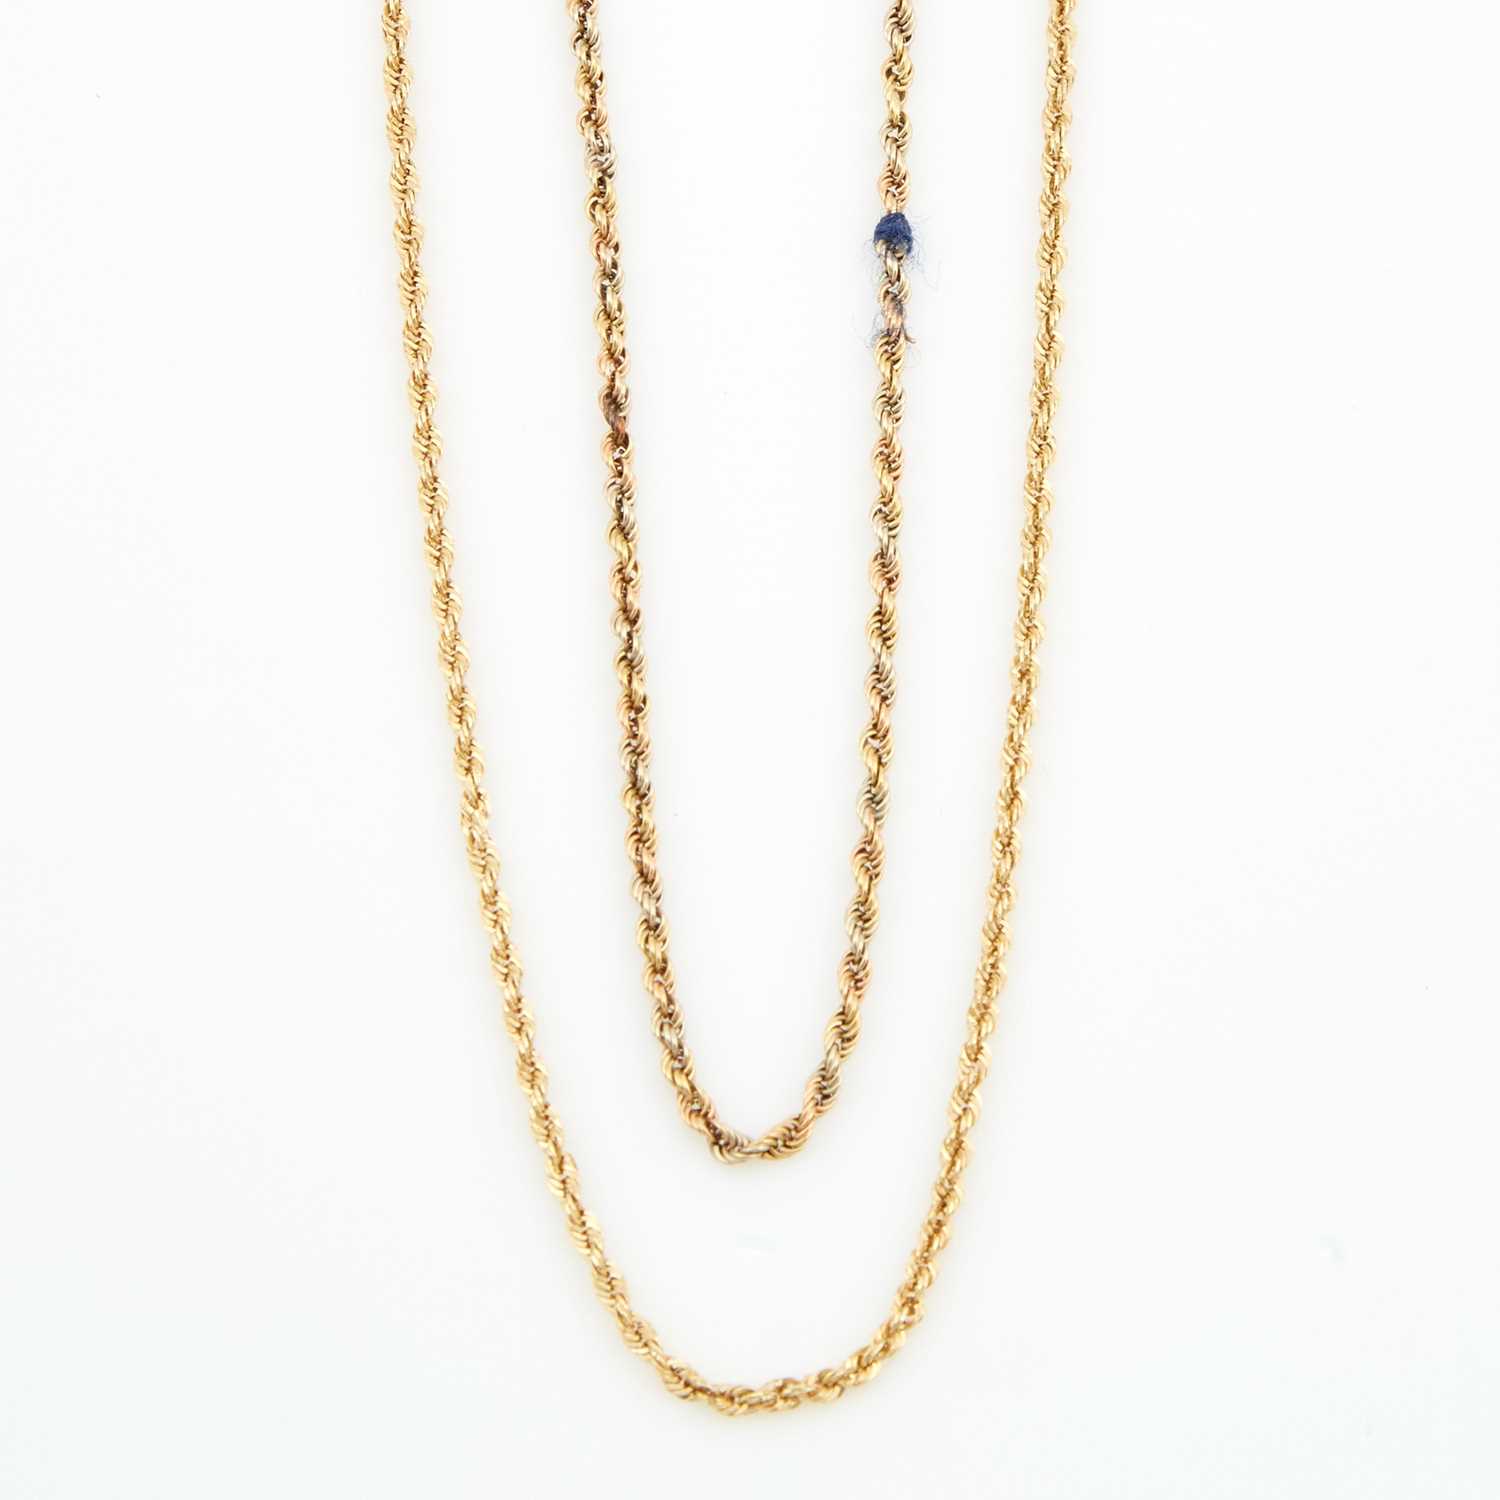 Lot 198 - Two Gold Neck Chains, 14K 7 dwt.